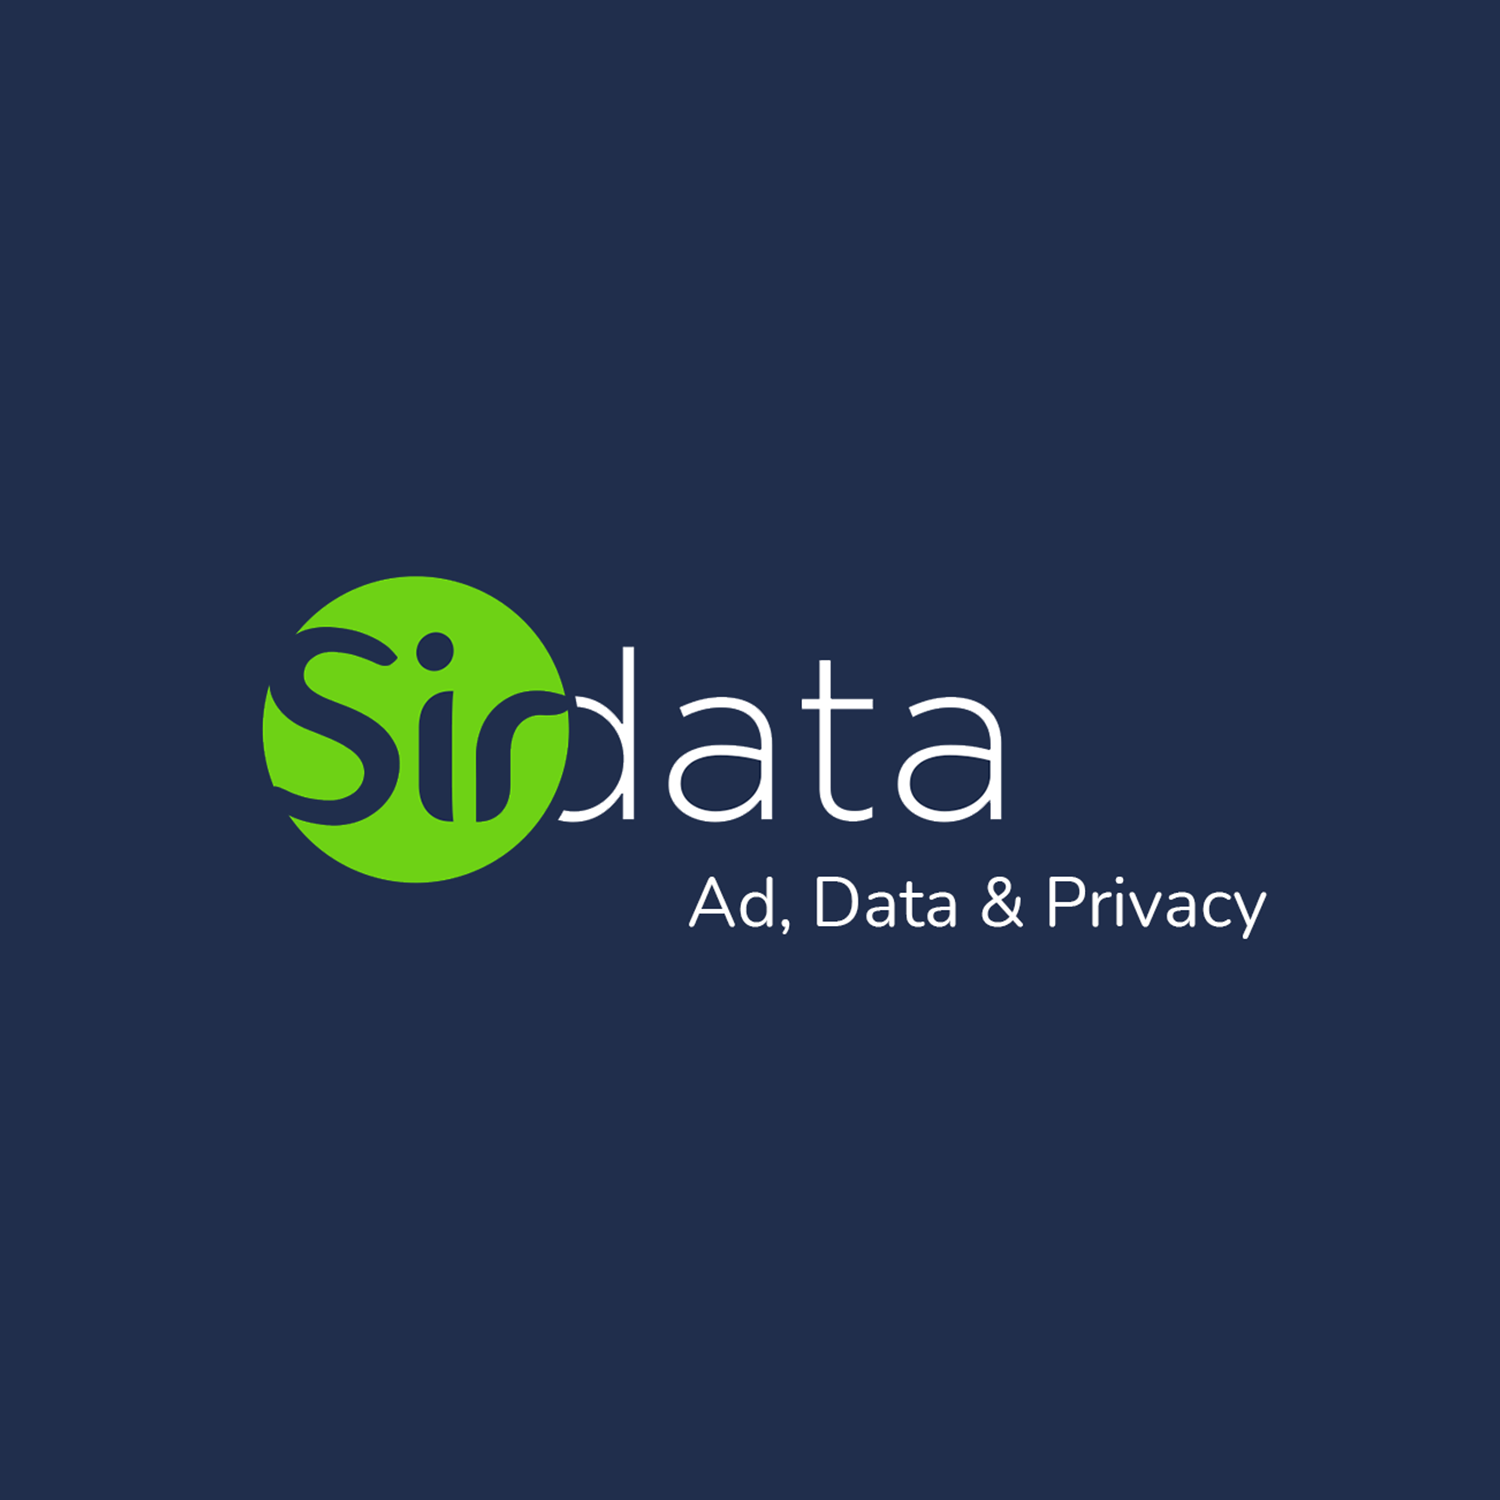 What is the “Firing tag management service” offered by Sirdata ?